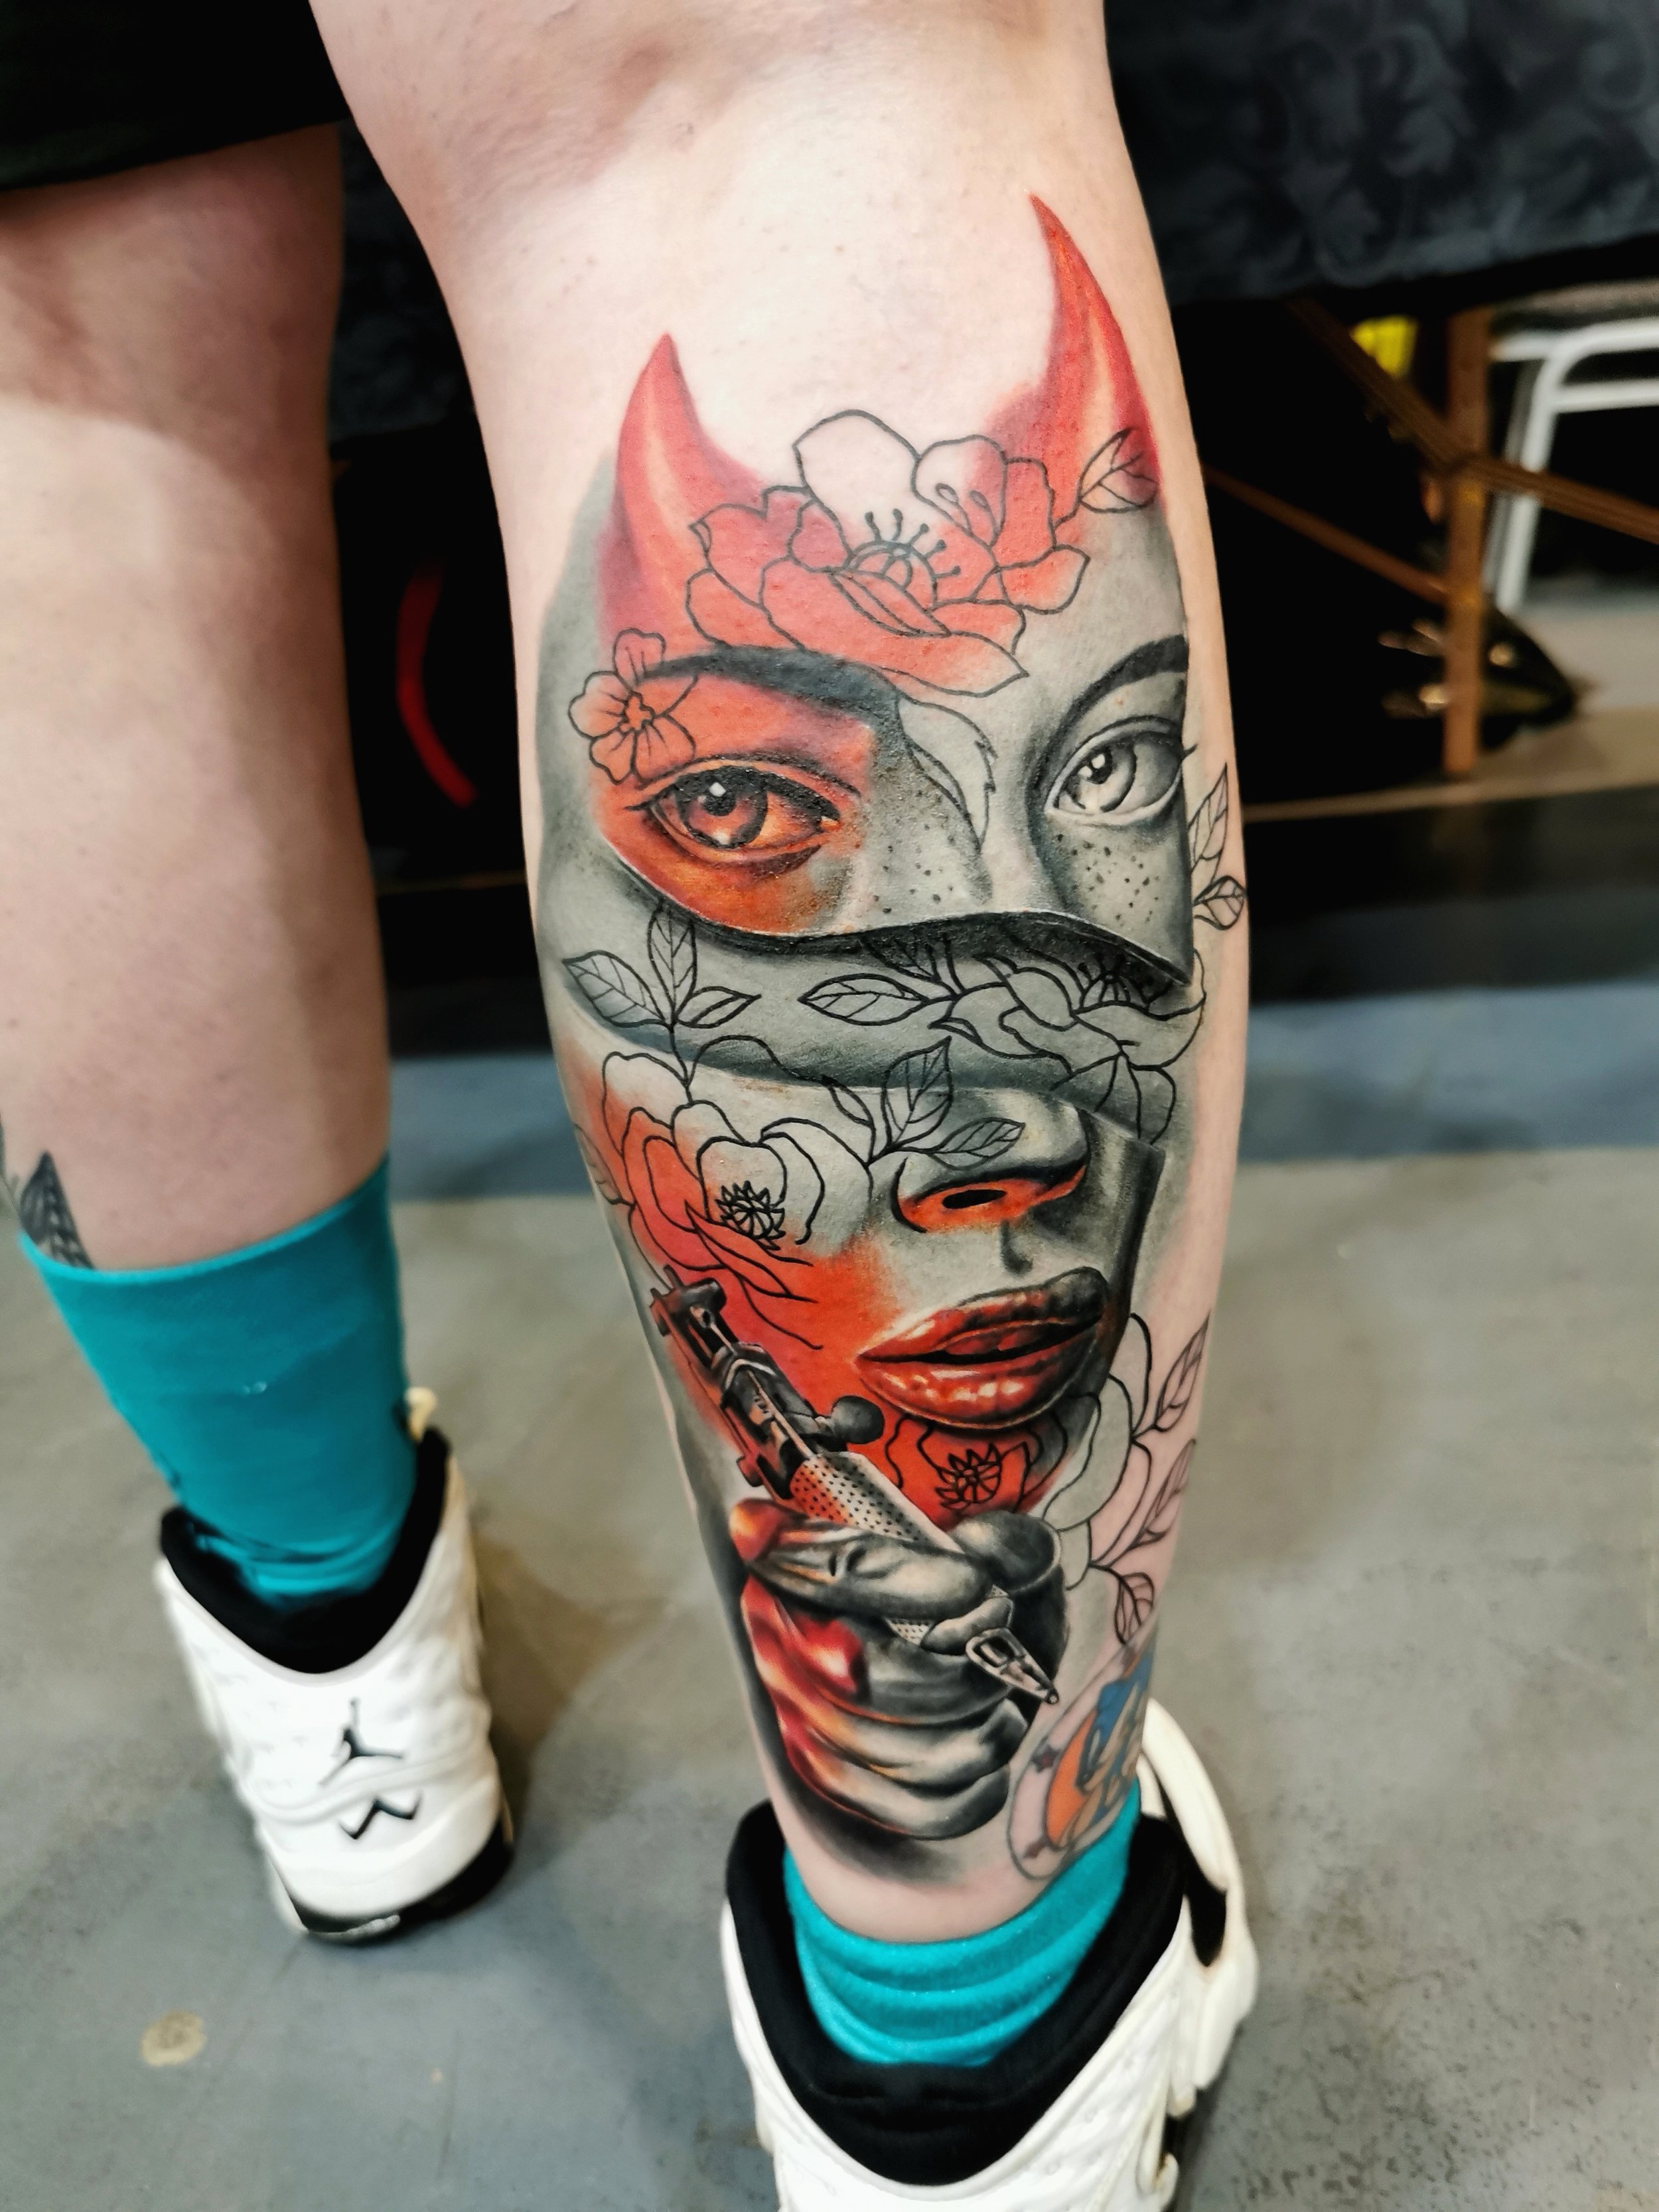 2021 Tattoo Competition Winners — The London Great British Tattoo Show